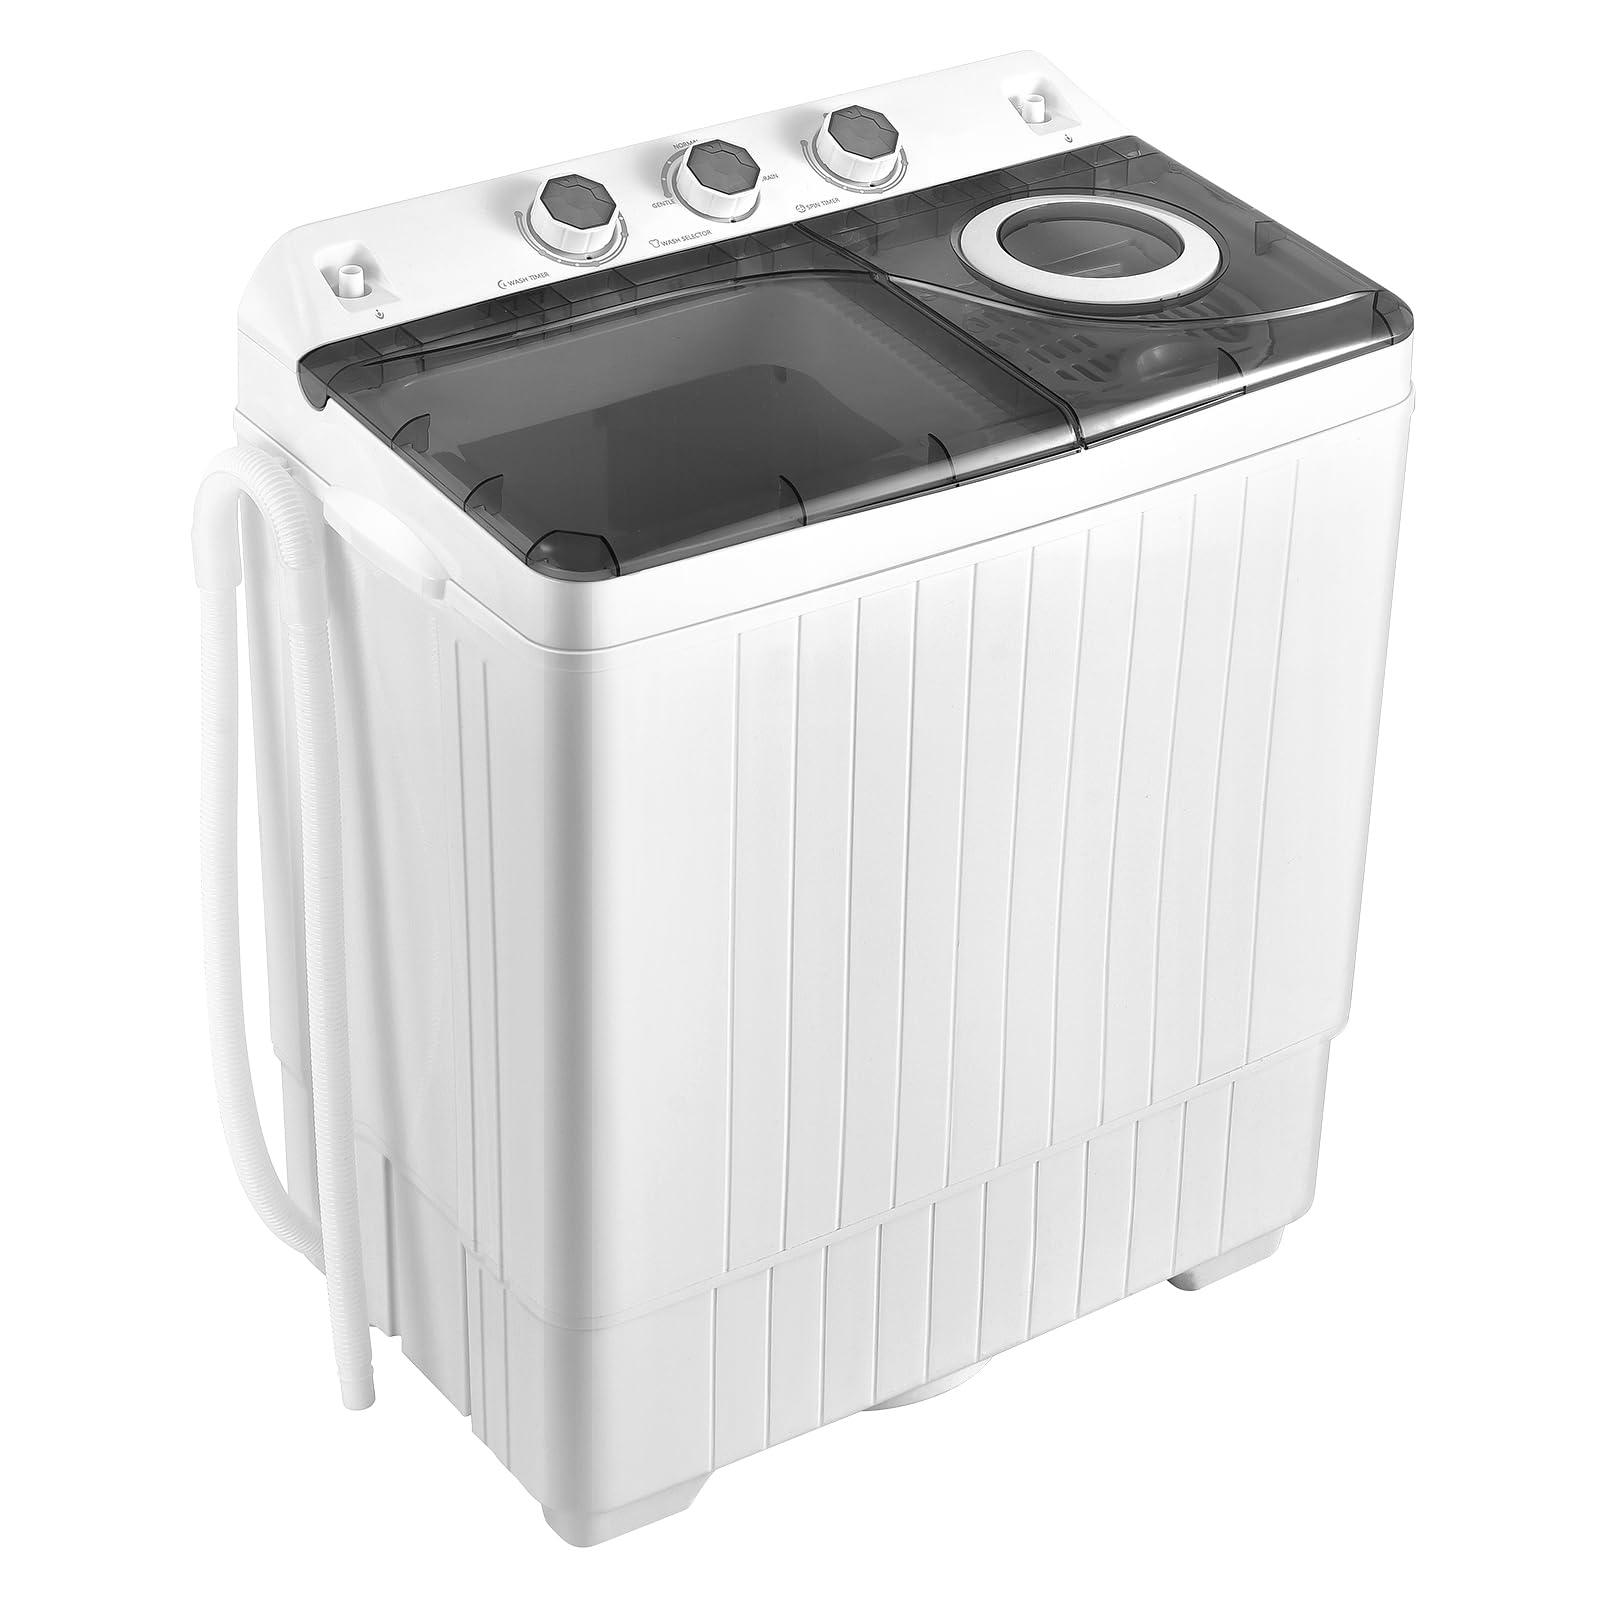 Panda 1.34 Cubic Feet cu. ft. Portable Washer in White